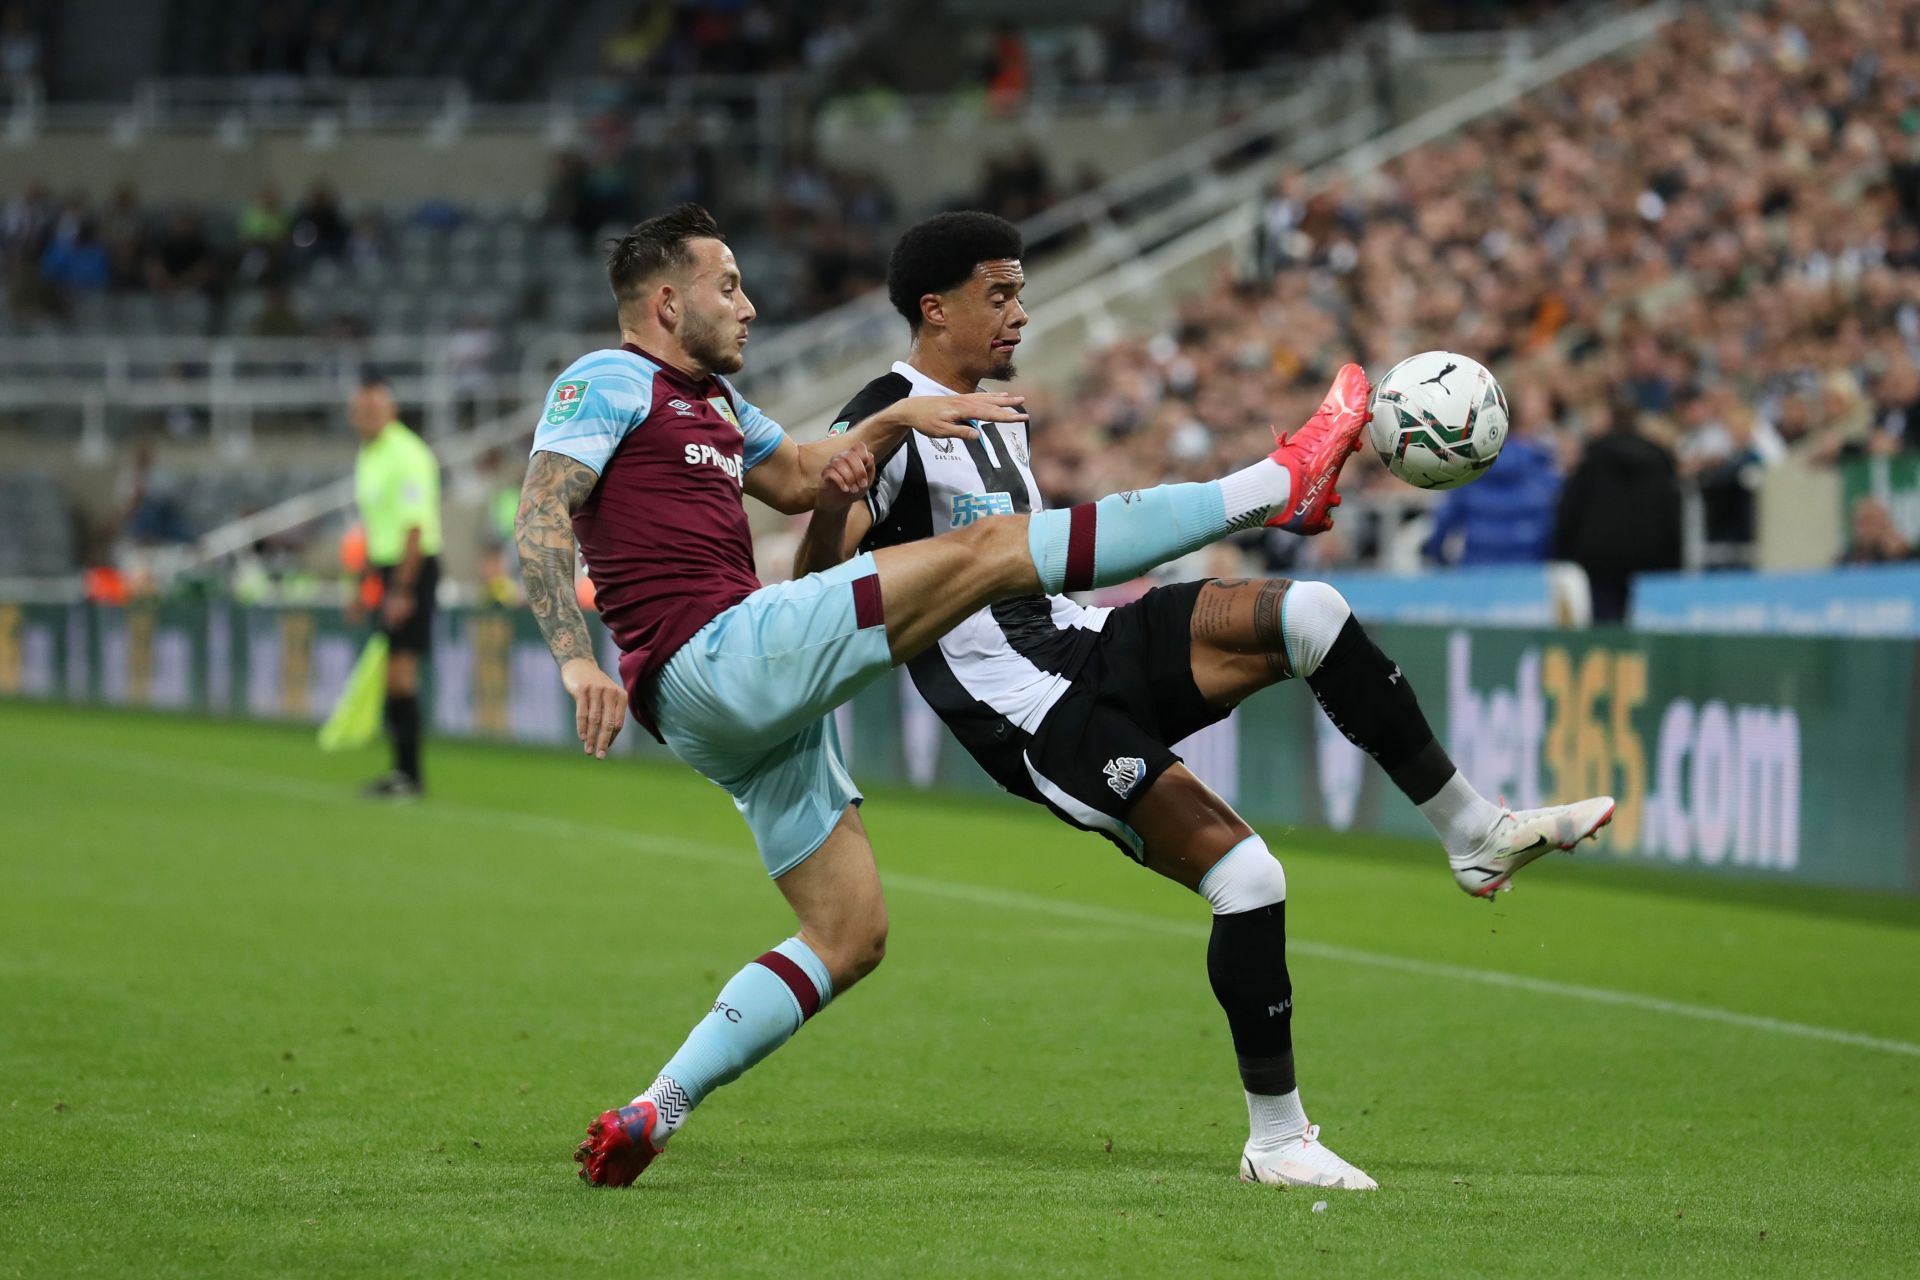 Newcastle United host Burnley in their Premier League fixture on Saturday